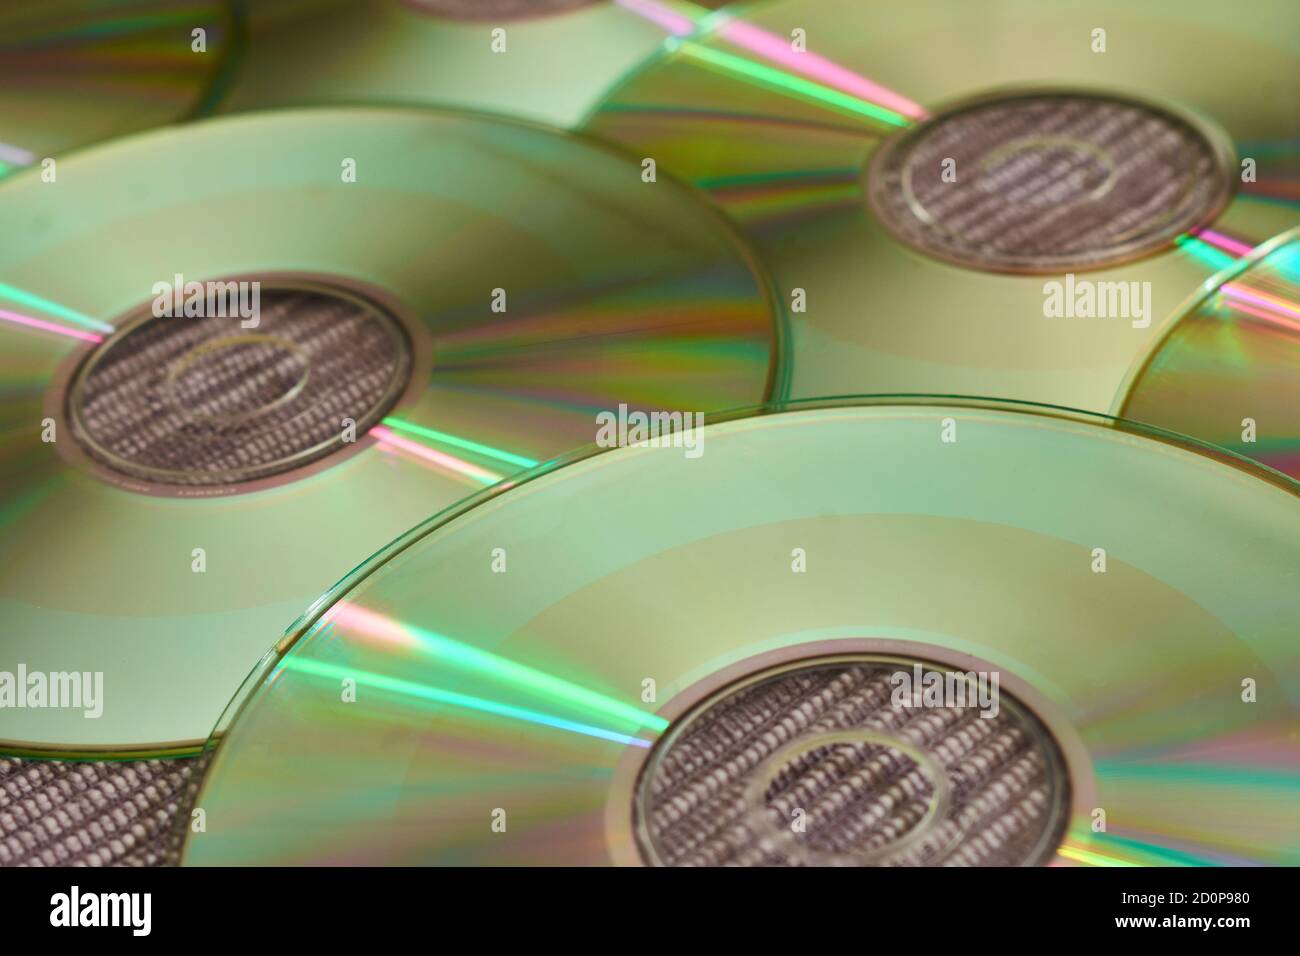 Bright compact discs with colored reflections of a disc jockey at a music session Stock Photo